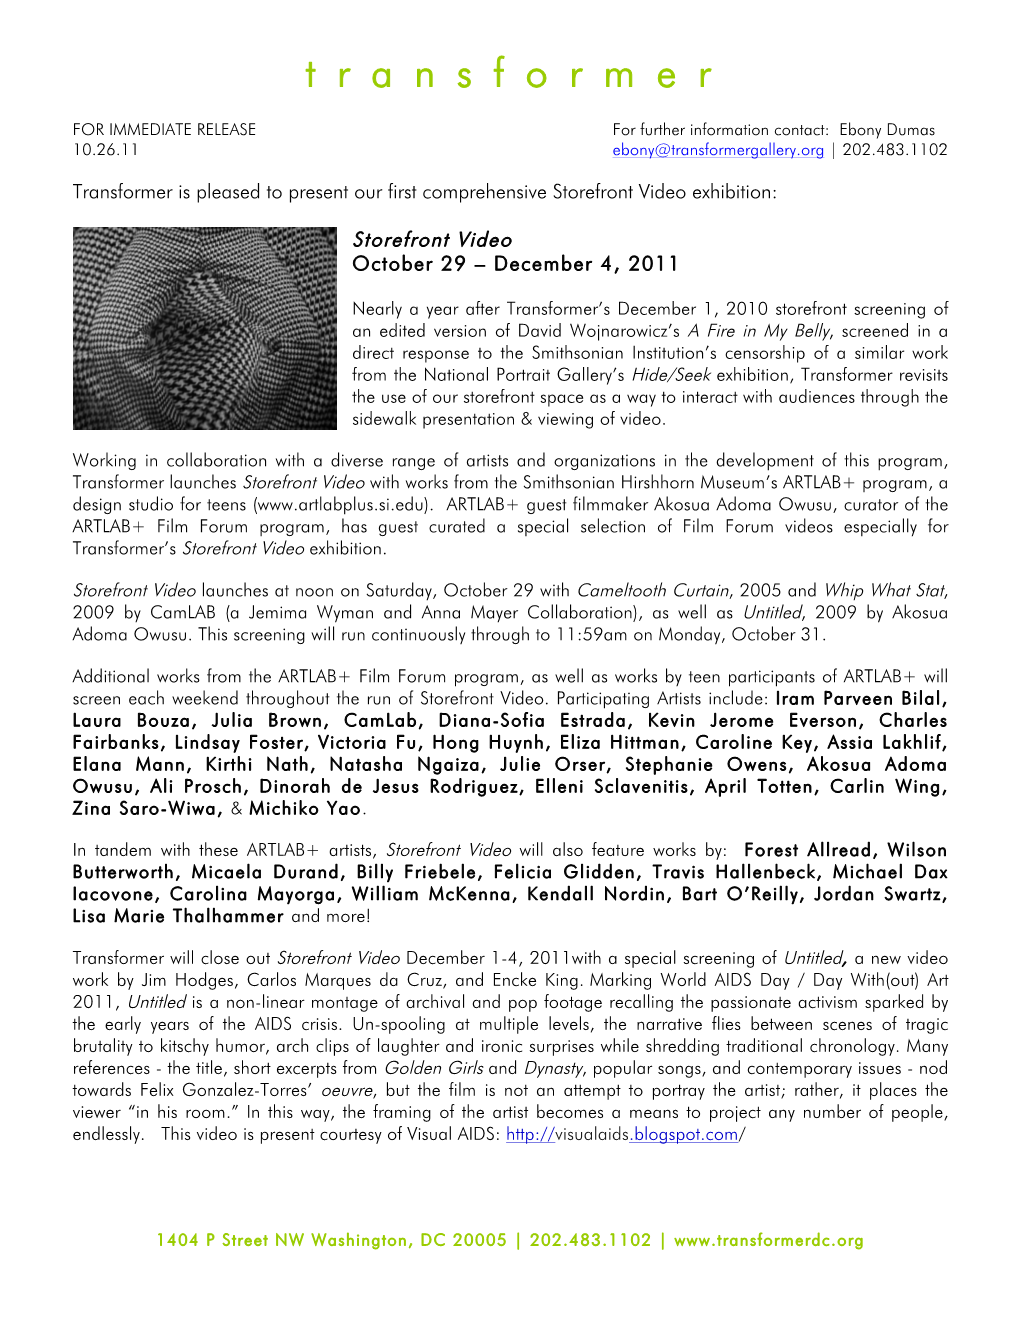 Storefront Video Exhibition Press Release